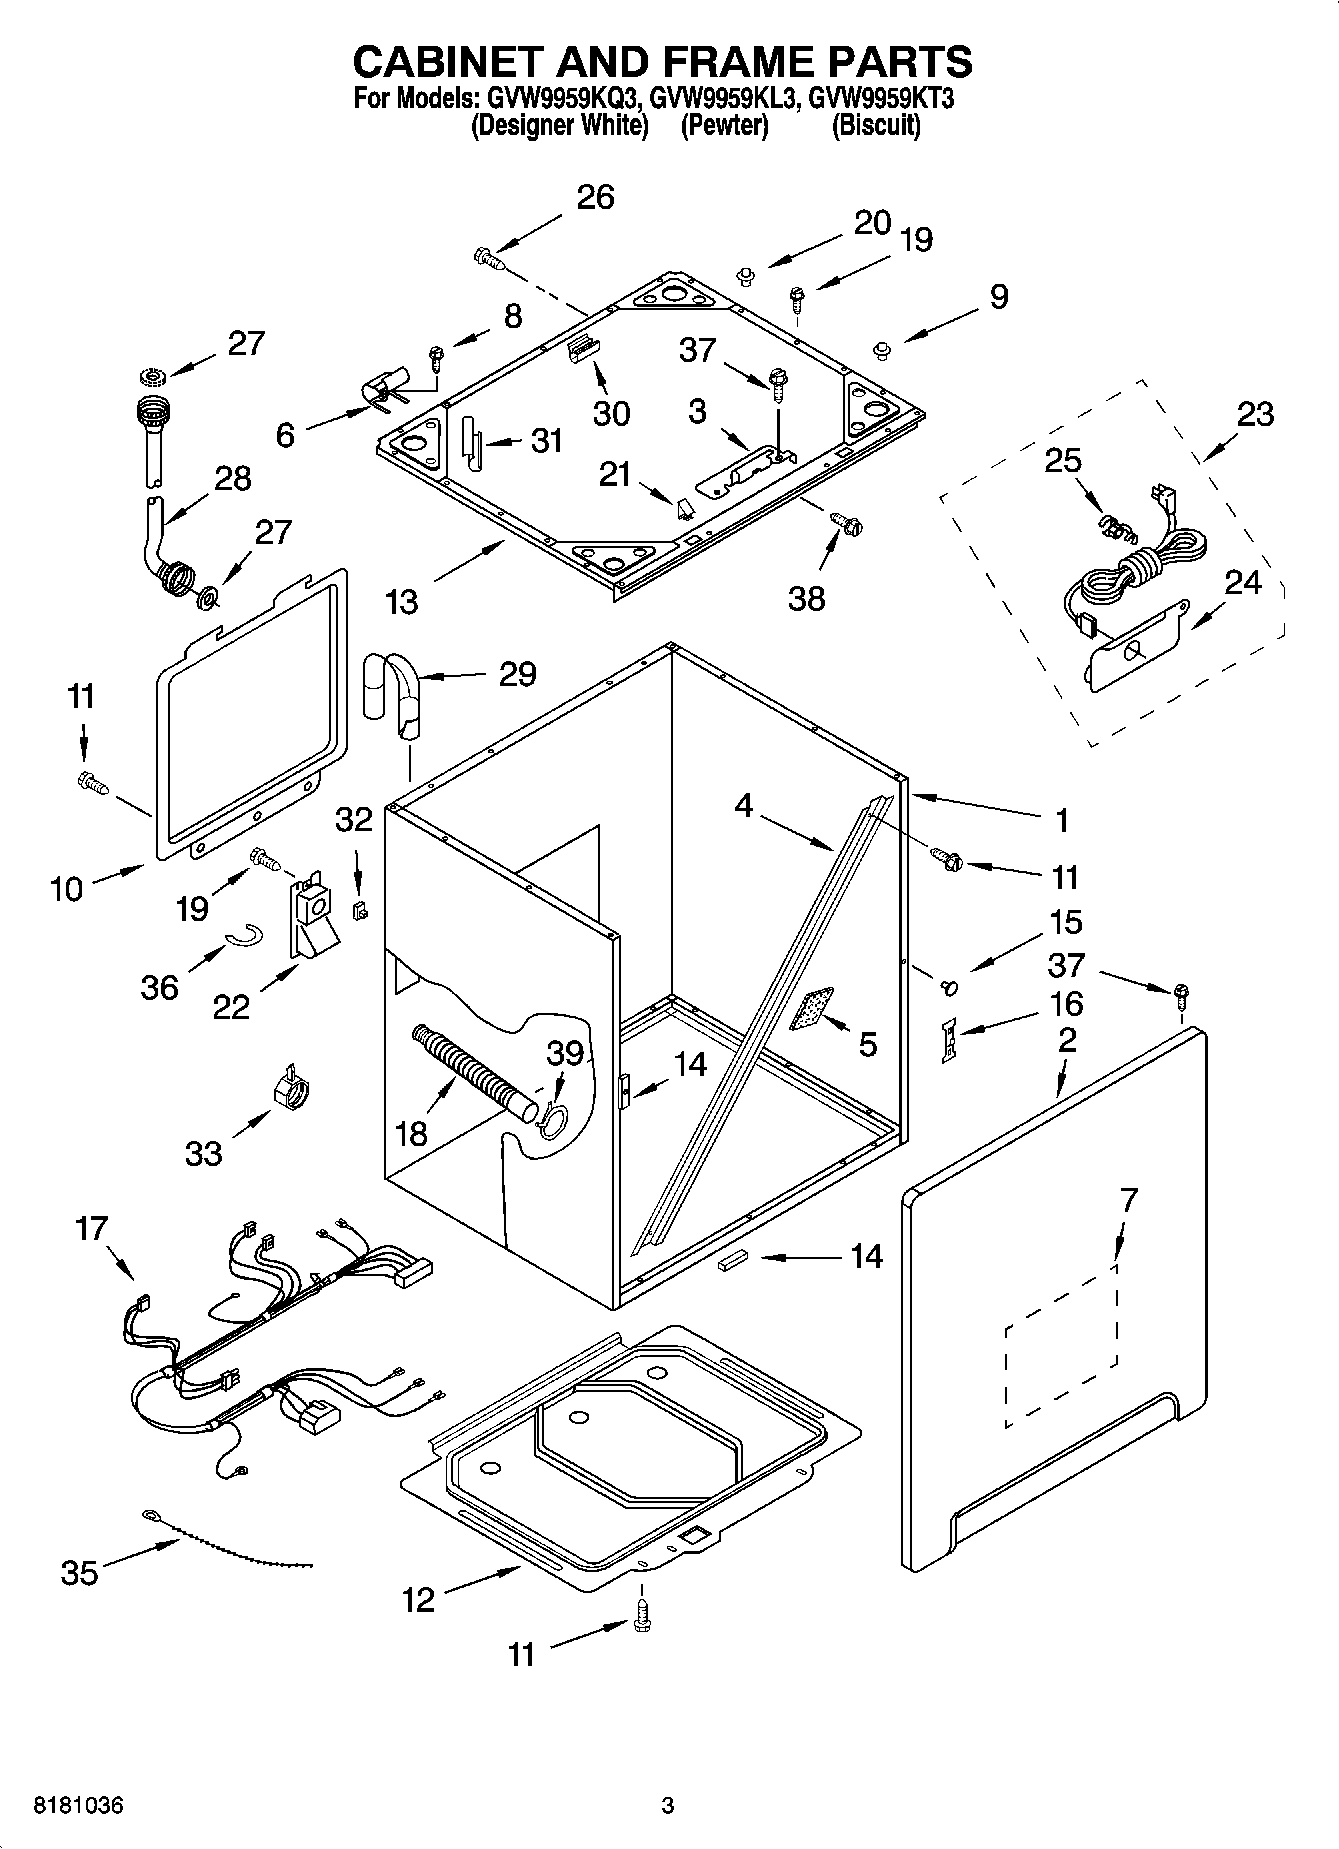 02 - CABINET AND FRAME PARTS